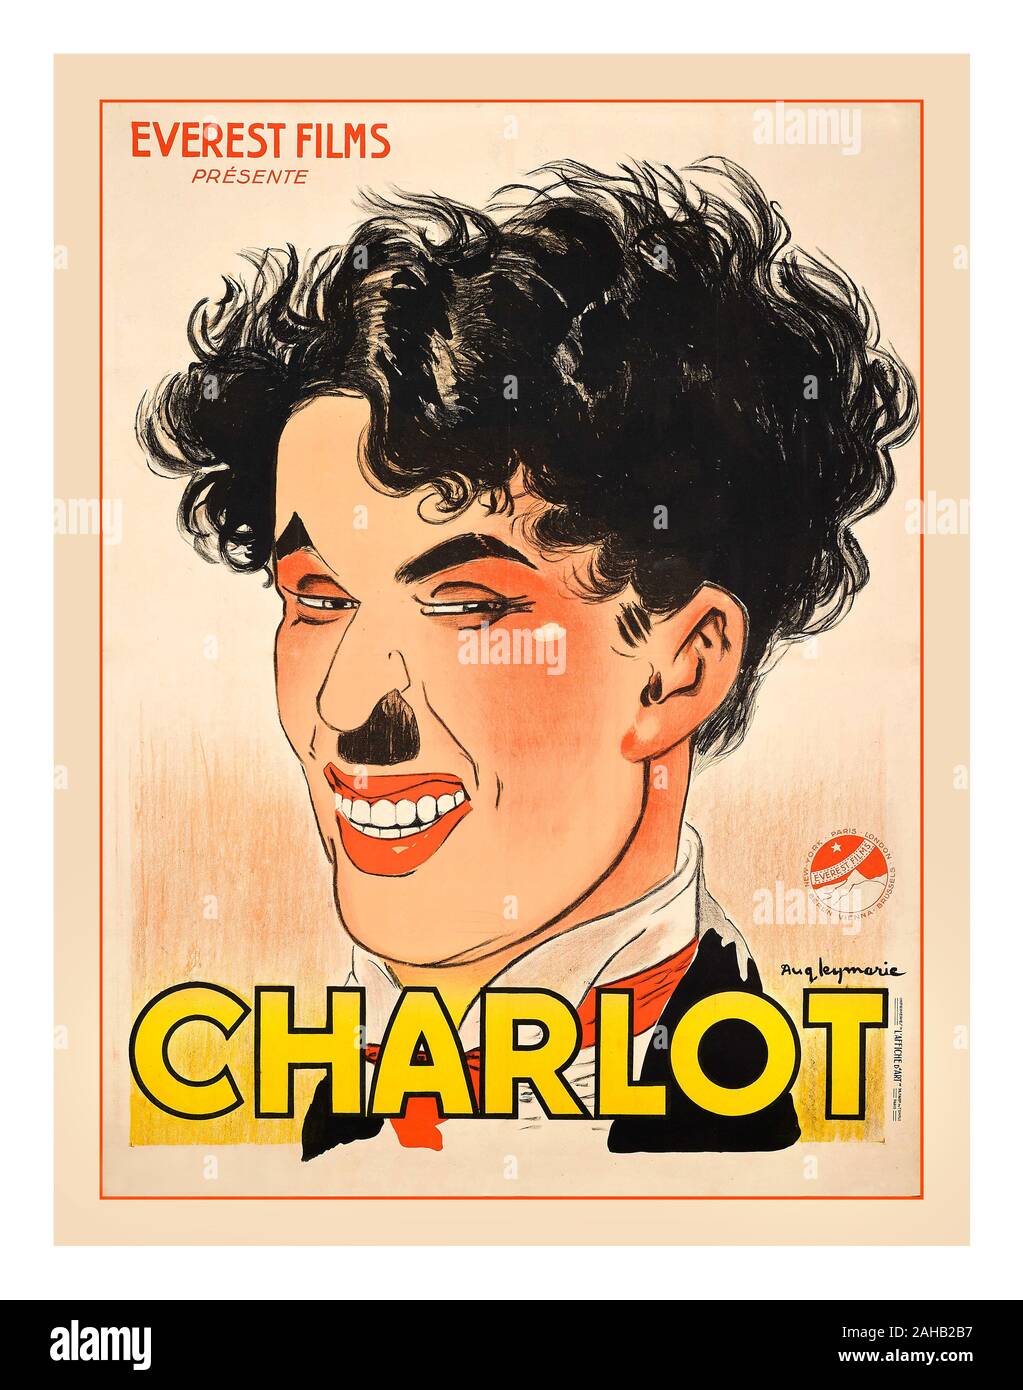 Vintage Film Poster 1918 CHARLIE CHAPLIN/CHARLOT Auguste Leymarie, Starring Charlie Chaplin Original Charlie Chaplin Movie Poster 'Affiche Passe-Partout' by Leymarie 1918  Everest Films French France Printed in America the poster was made to advertise the success of Charlie Chaplin. This poster is featured in the book 'Charlie Chaplin - Movie Posters' The Tramp (Charlot in several languages), also known as The Little Tramp, was British actor Charlie Chaplin's most memorable on-screen character and an icon in silent world cinema Stock Photo